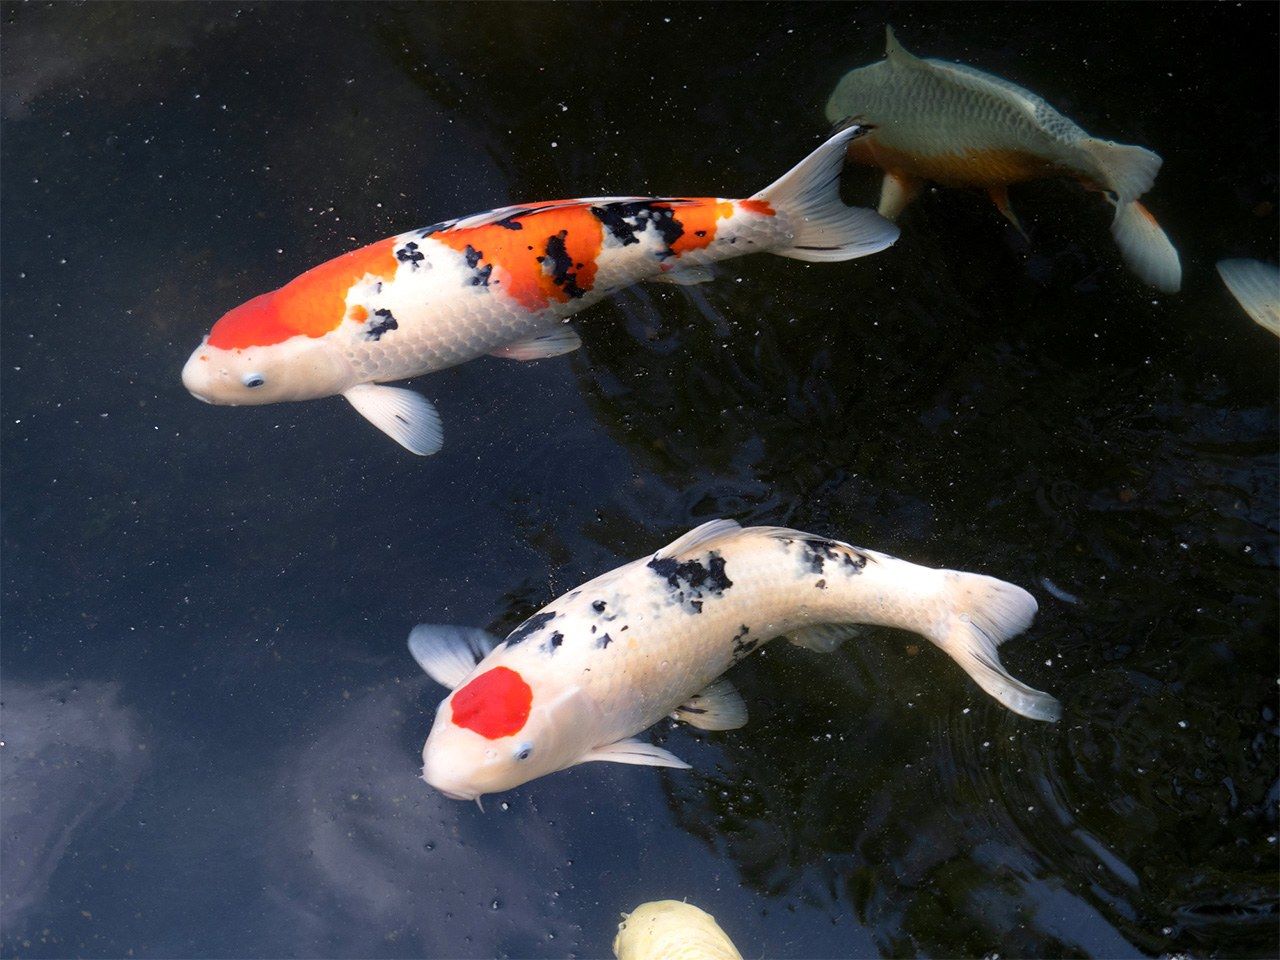 Nishikigoi were first farmed for food, but later gained appreciation for their varied colors. (© Pixta)